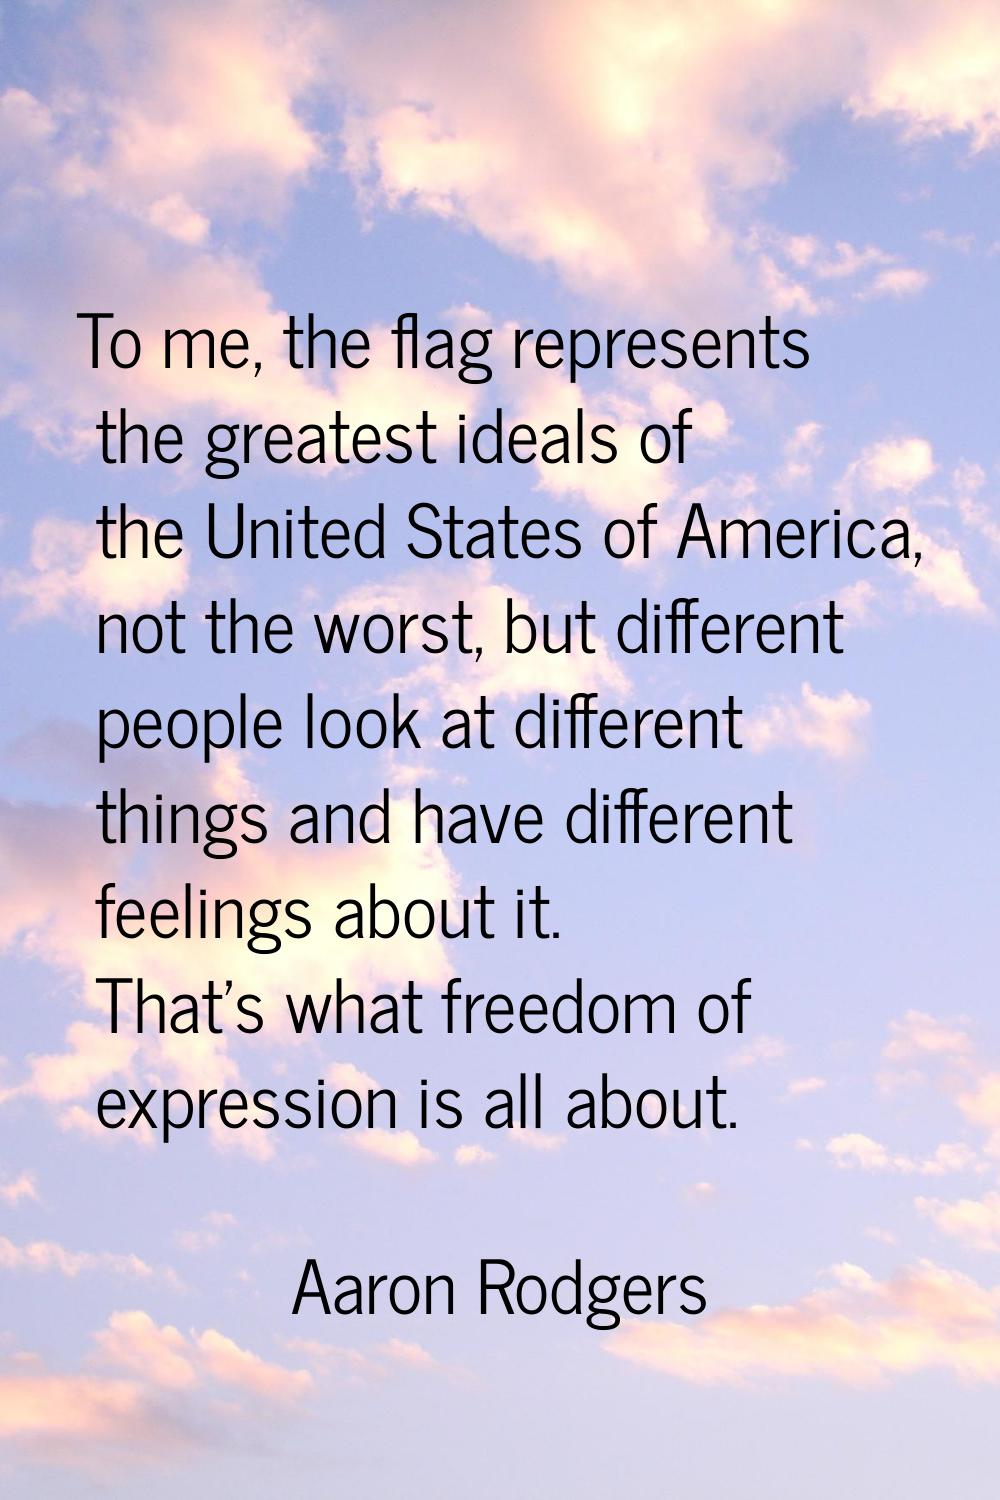 To me, the flag represents the greatest ideals of the United States of America, not the worst, but 